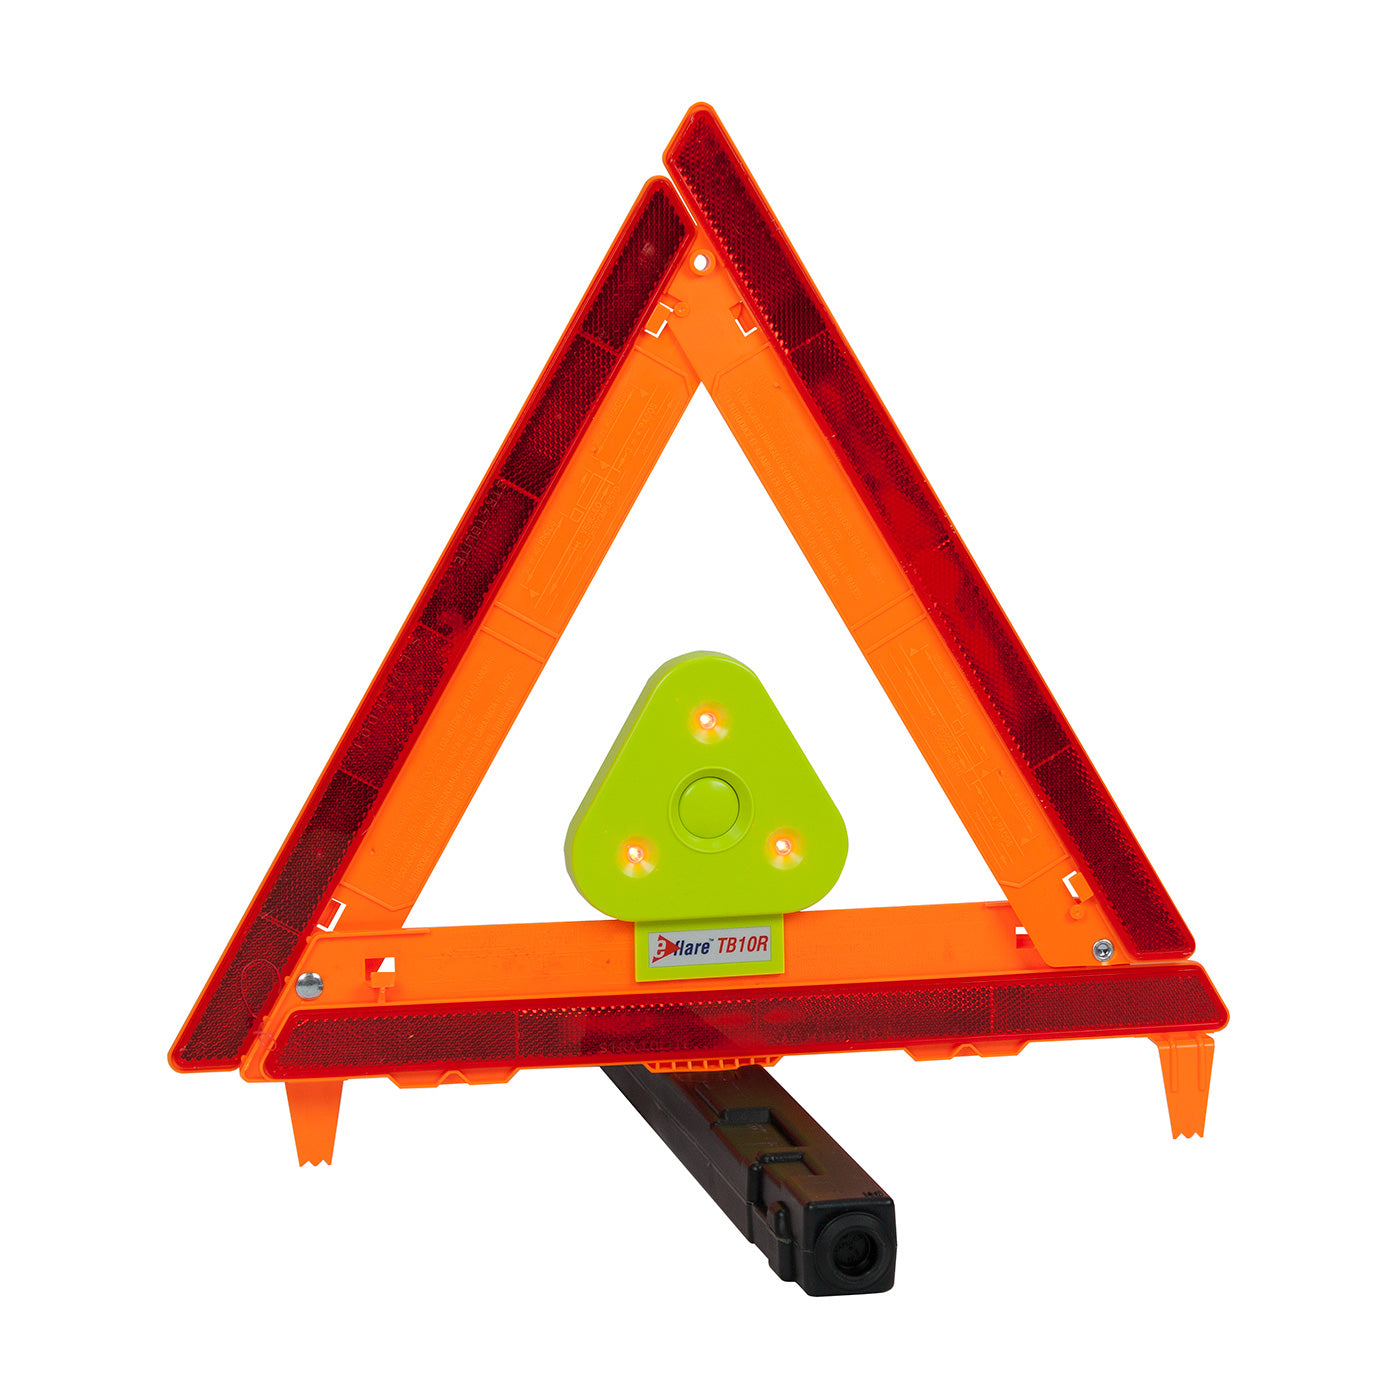 Protective Industrial Products-E-FLARE BEACON FOR SAFETY TRIANGLE